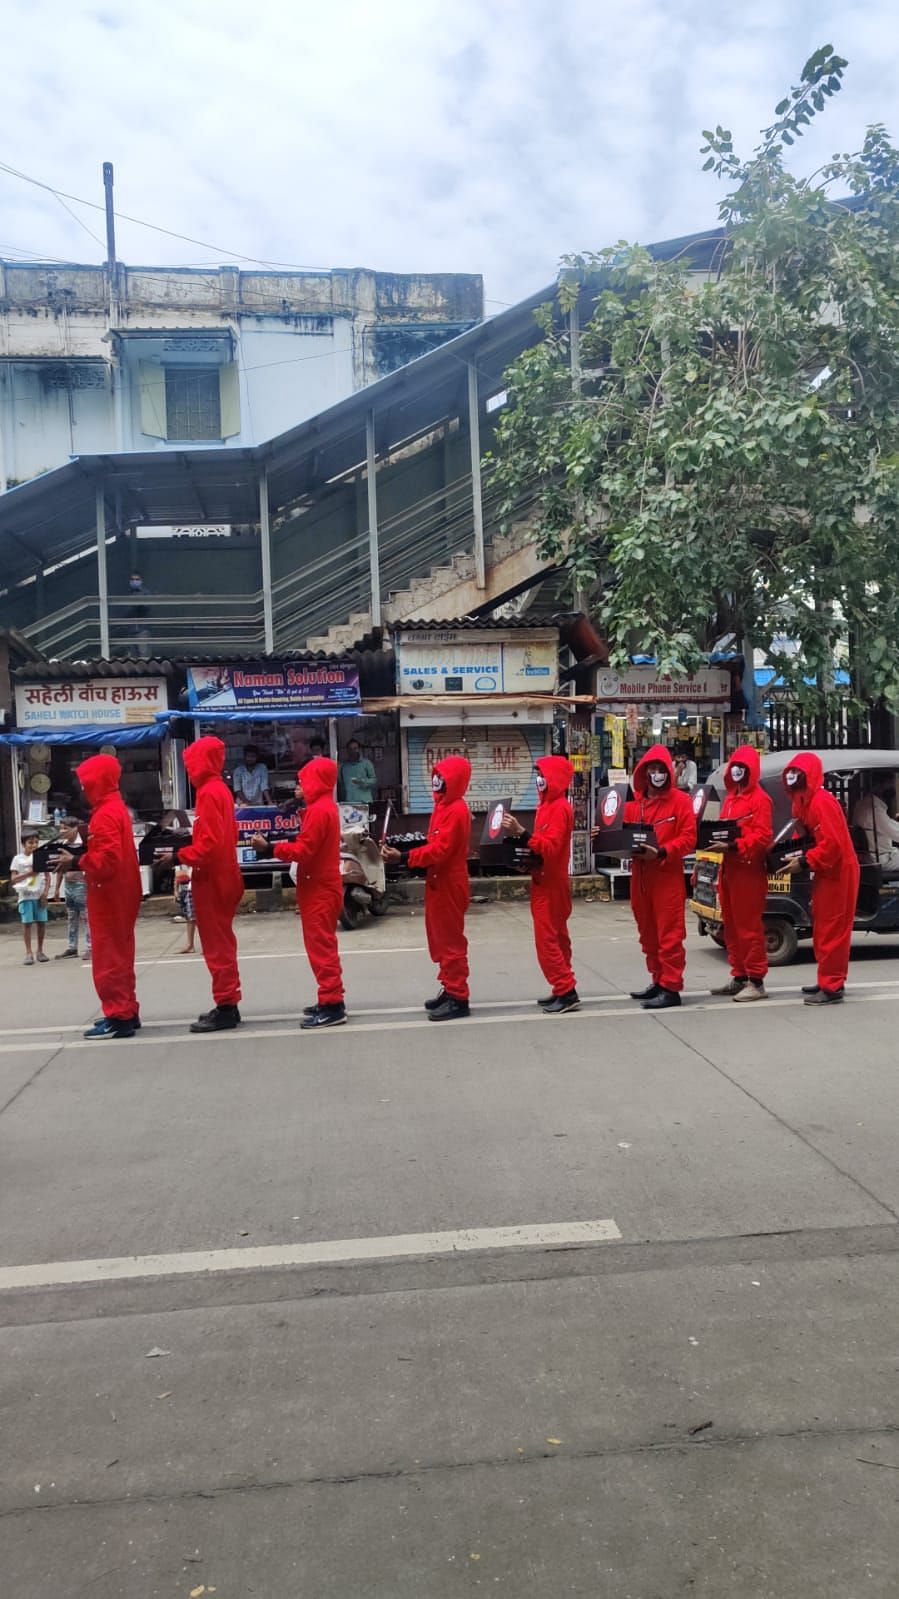 The Dali gang takes over Mumbai streets in ‘Money Heist’ style